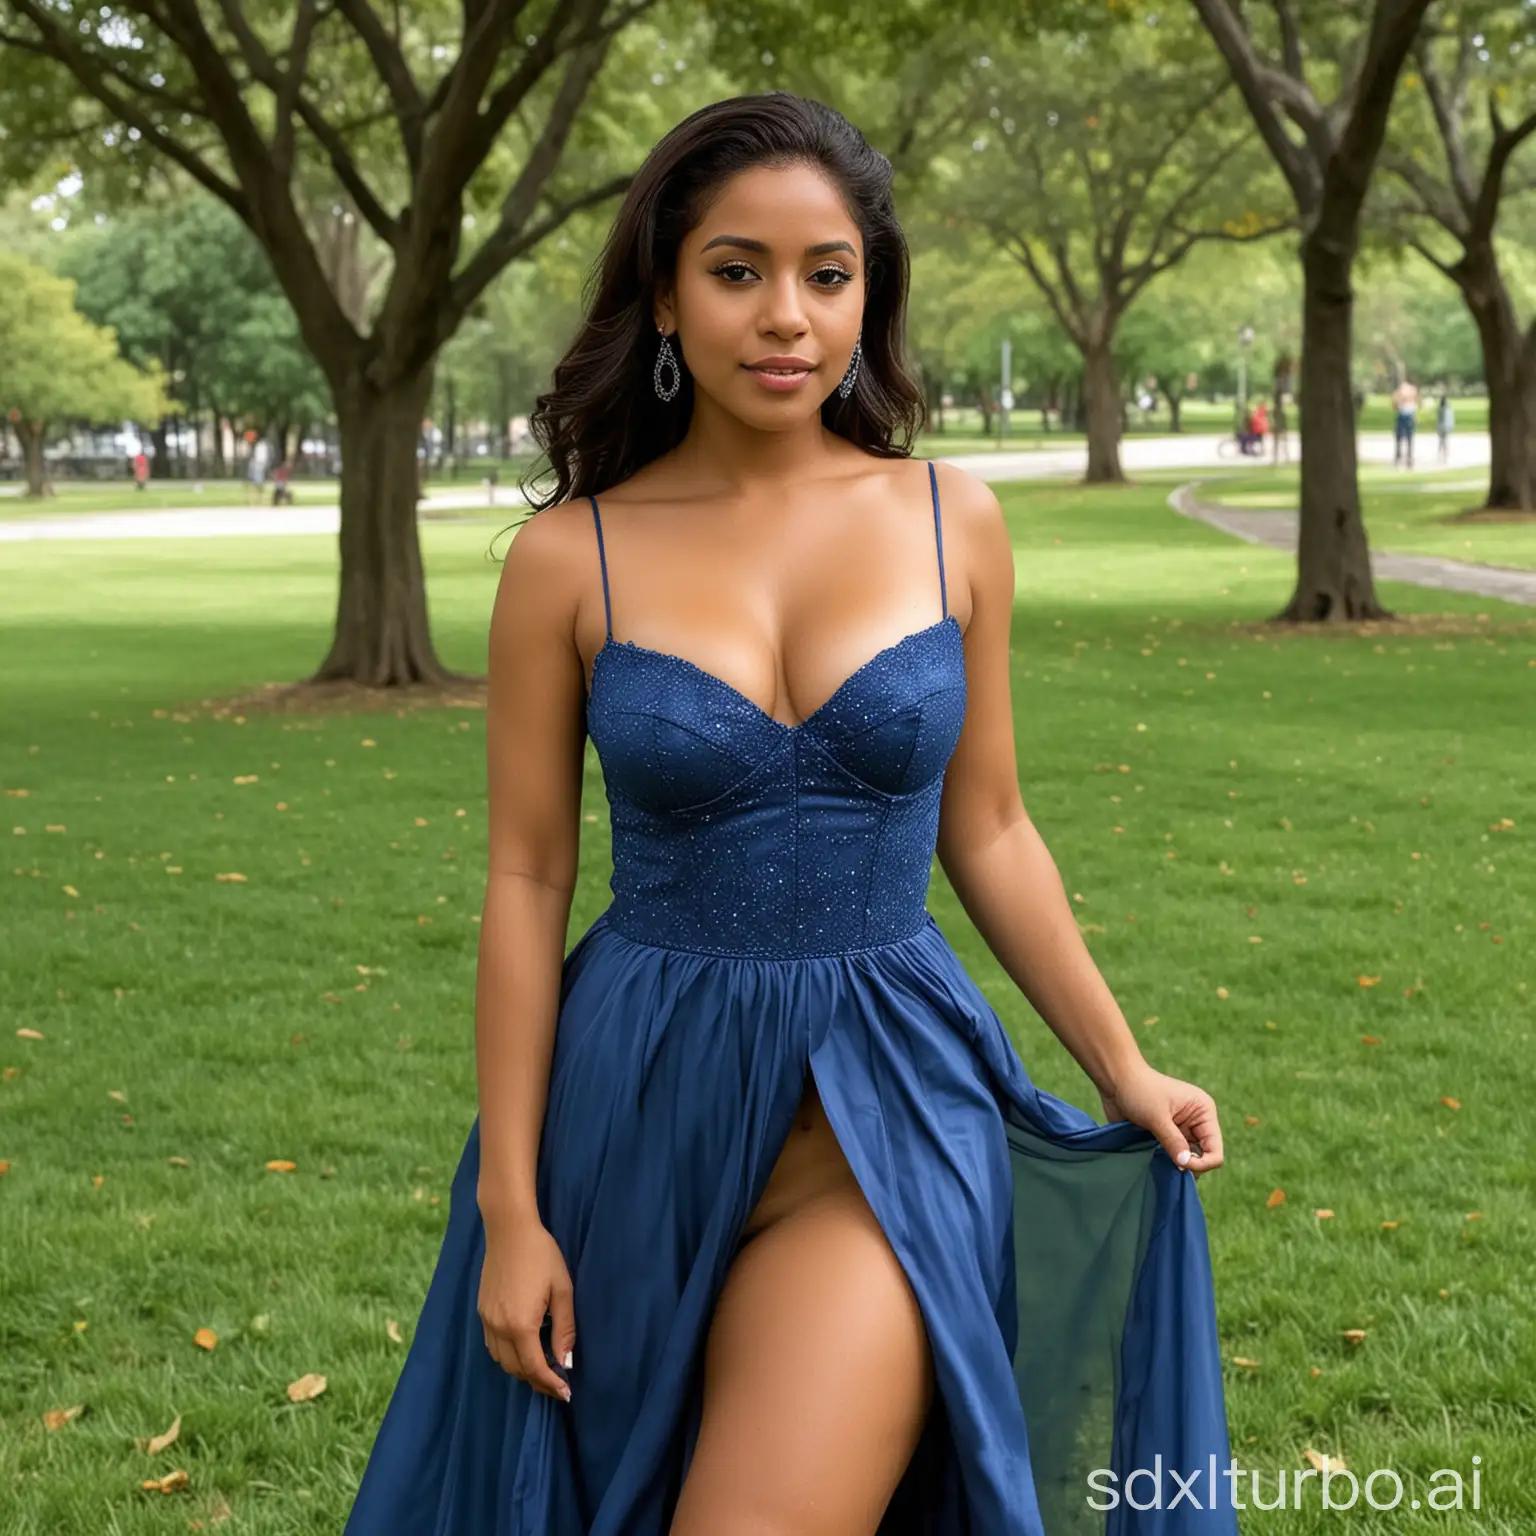 Dominican-Sexy-Lady-in-Blue-Gown-with-Firm-Breasts-Enjoying-Park-Stroll